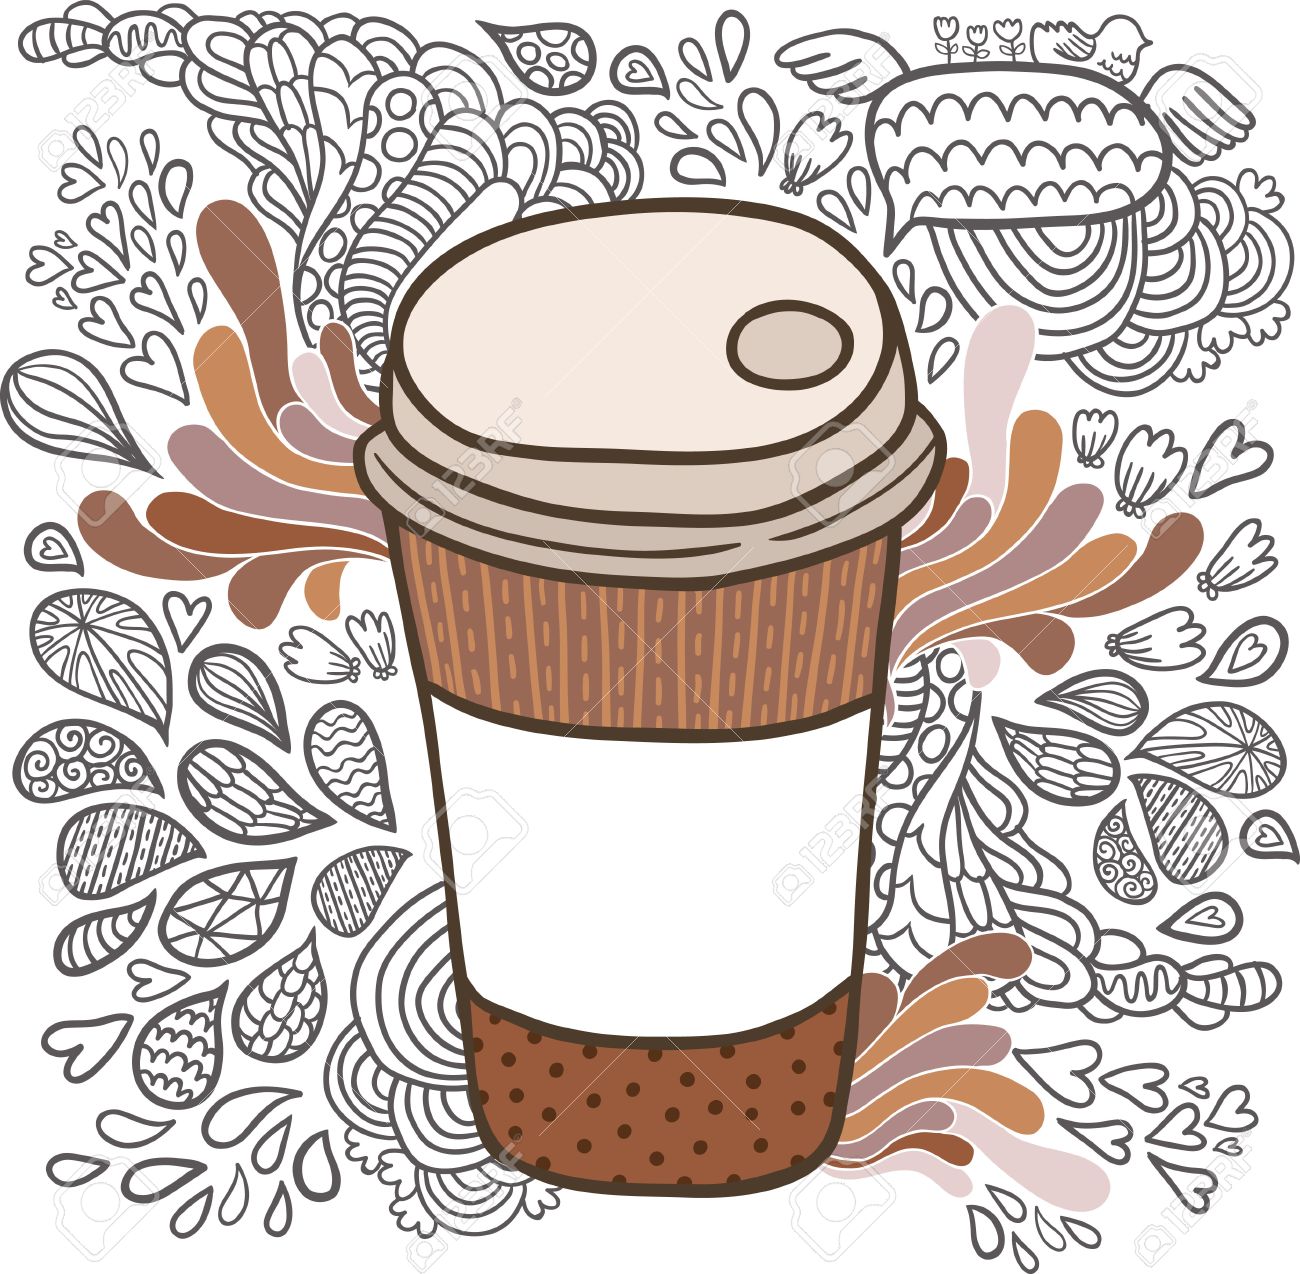 Coffee Cup Drawing Free at GetDrawings Free download